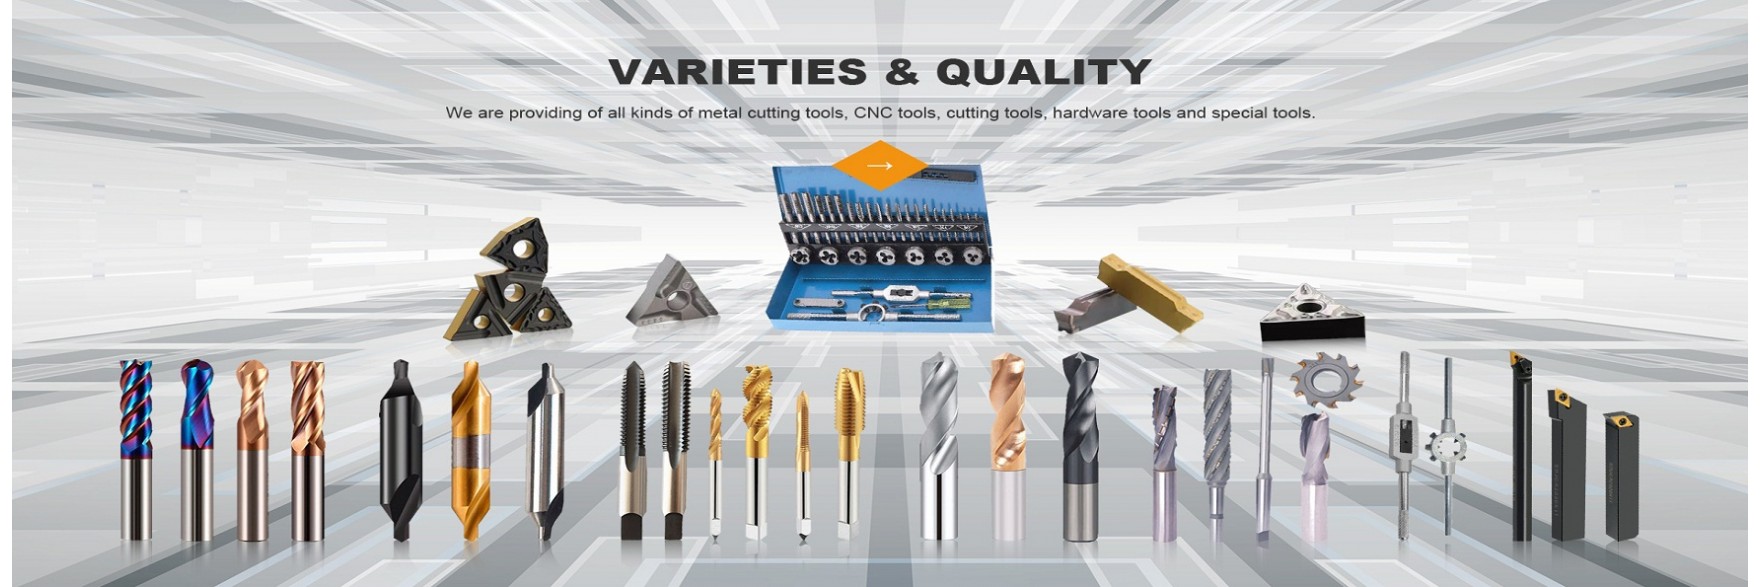 Find your tool with us!